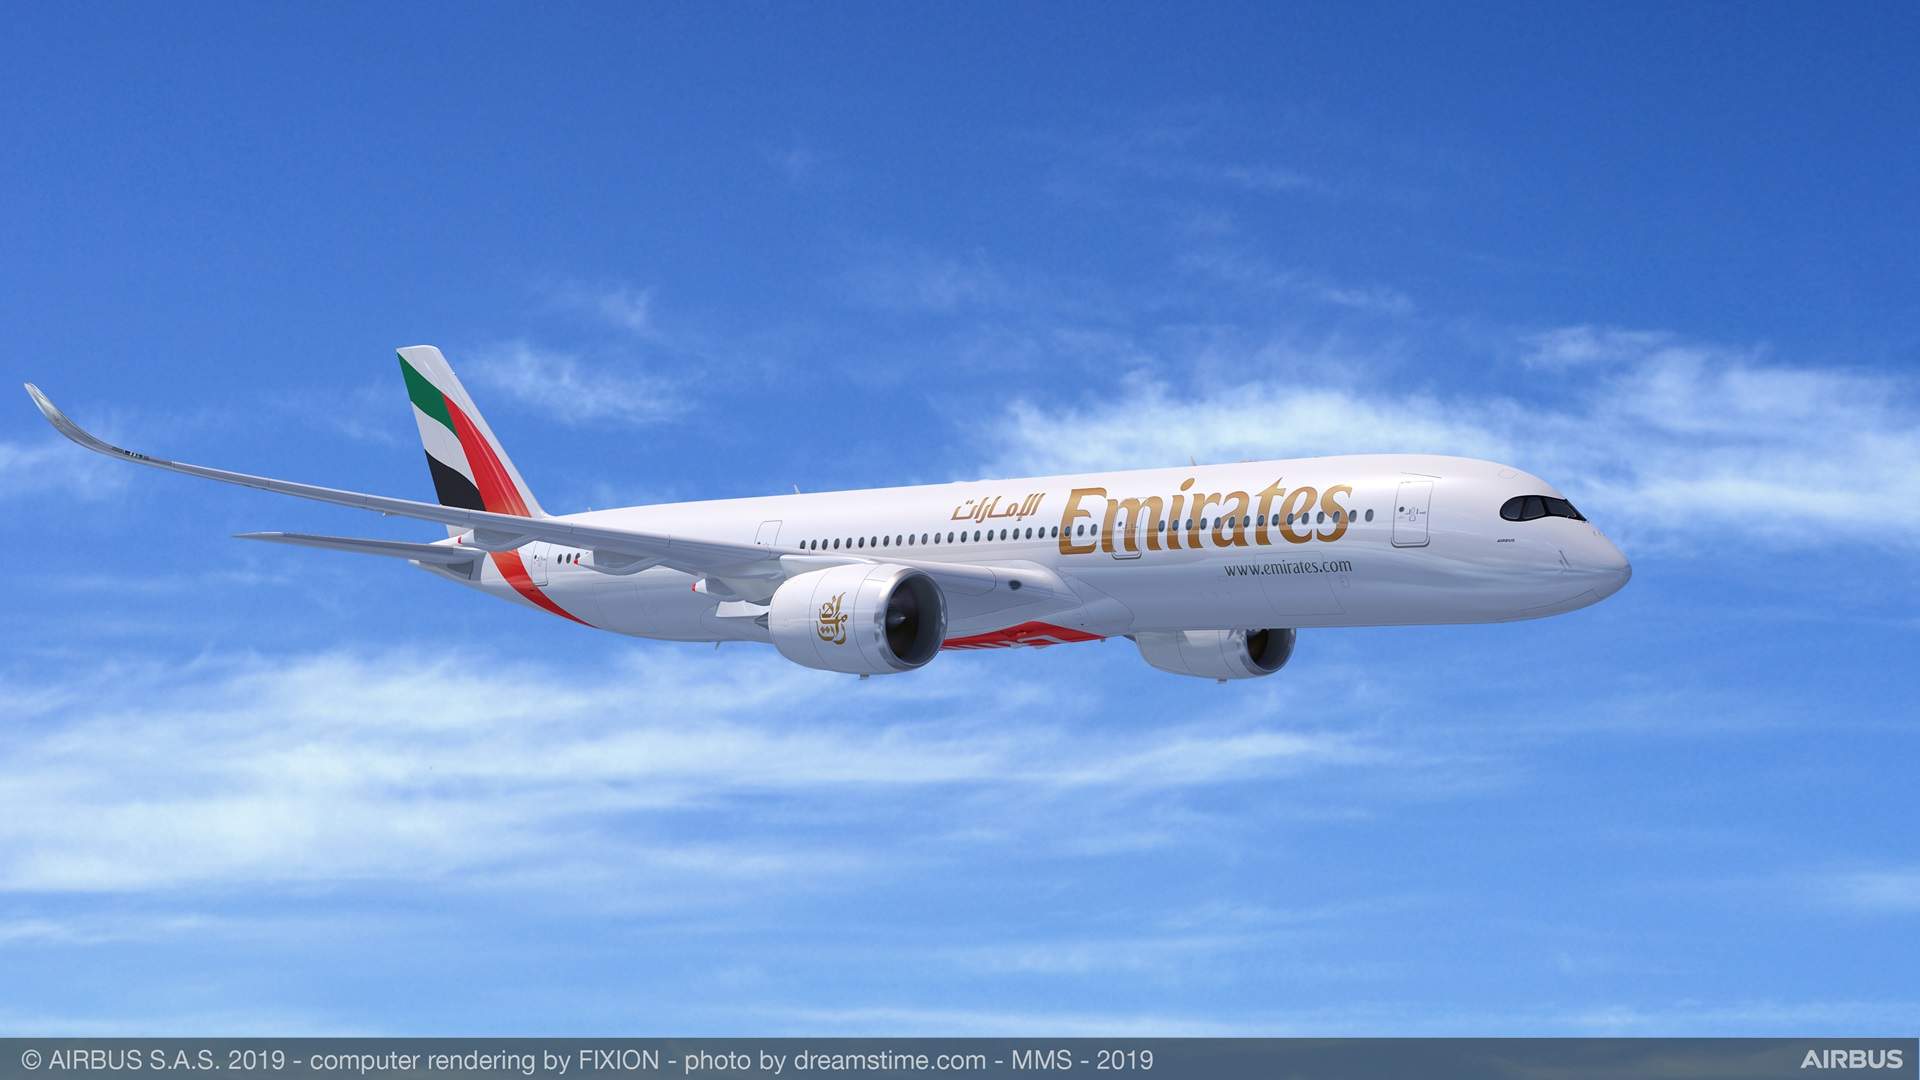 What’s Going On With Emirates And The Airbus A350??